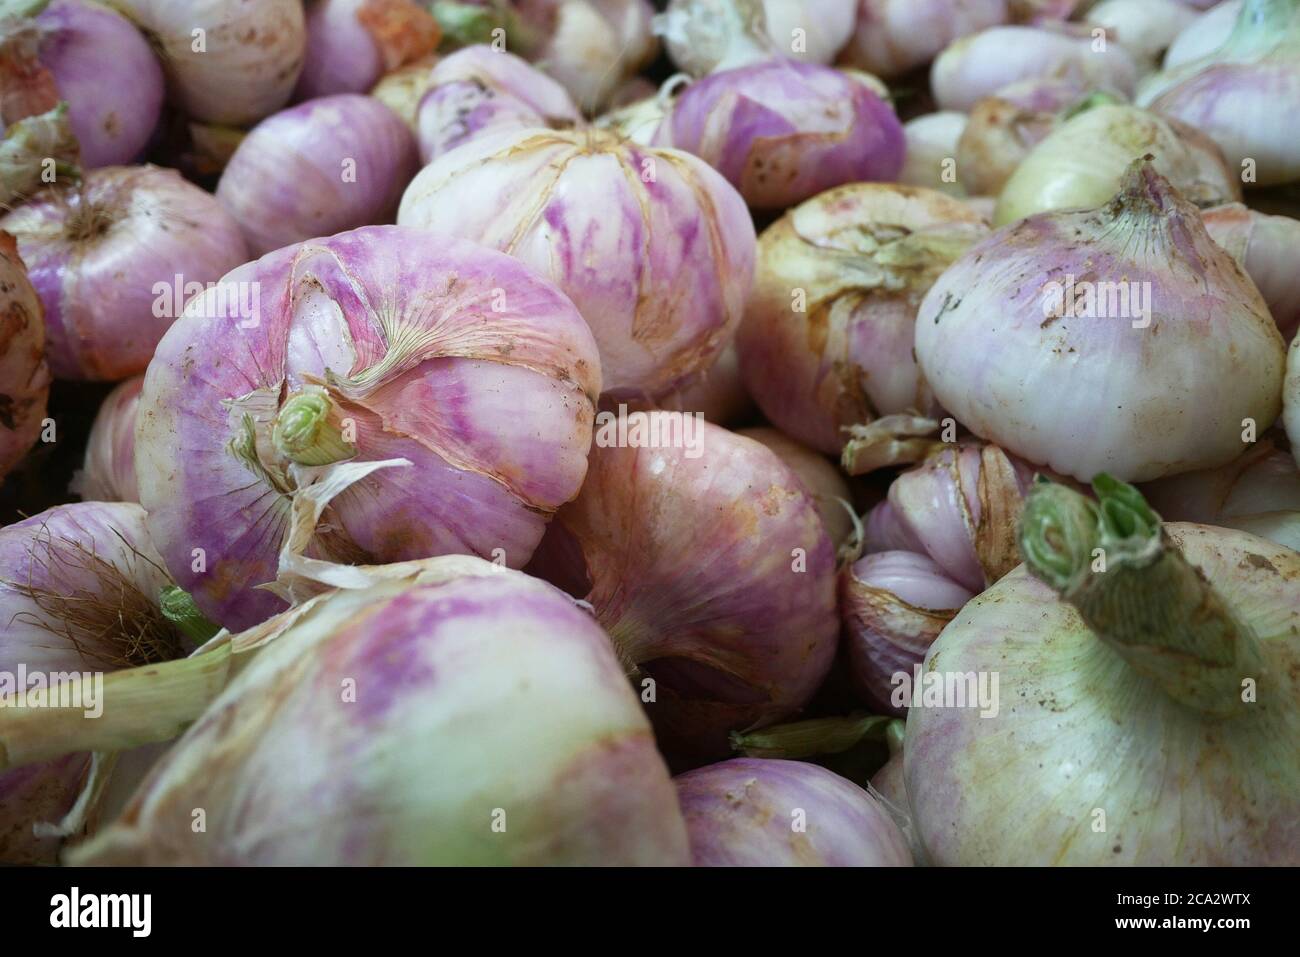 Huge violet onions from Lezignan-les-Cebes, France. Stock Photo